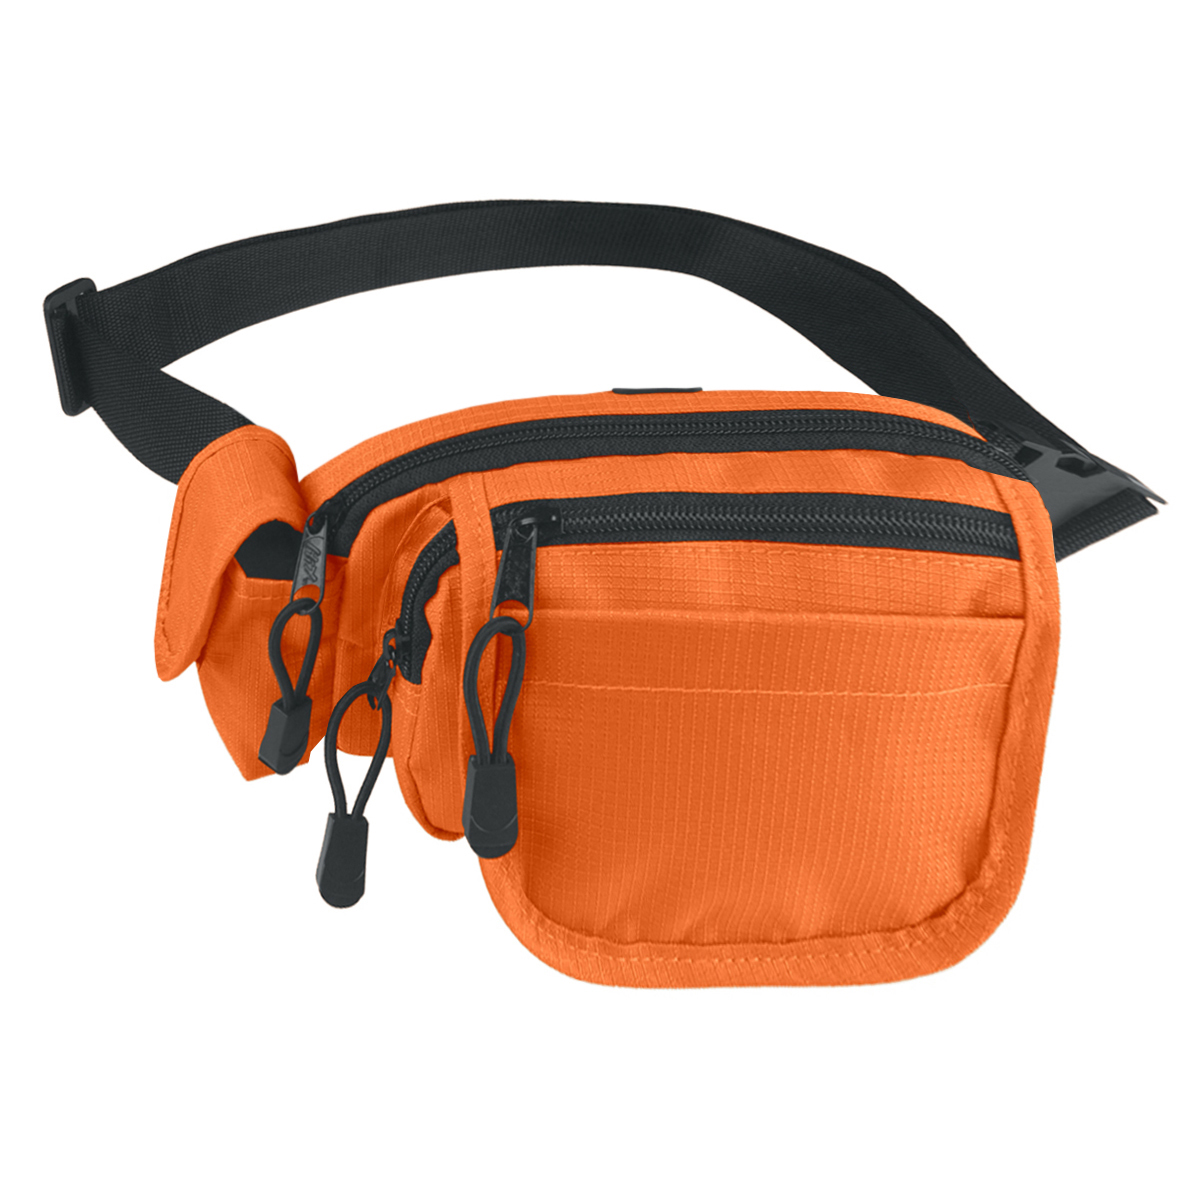 Imprinted All-In-One Fanny Pack